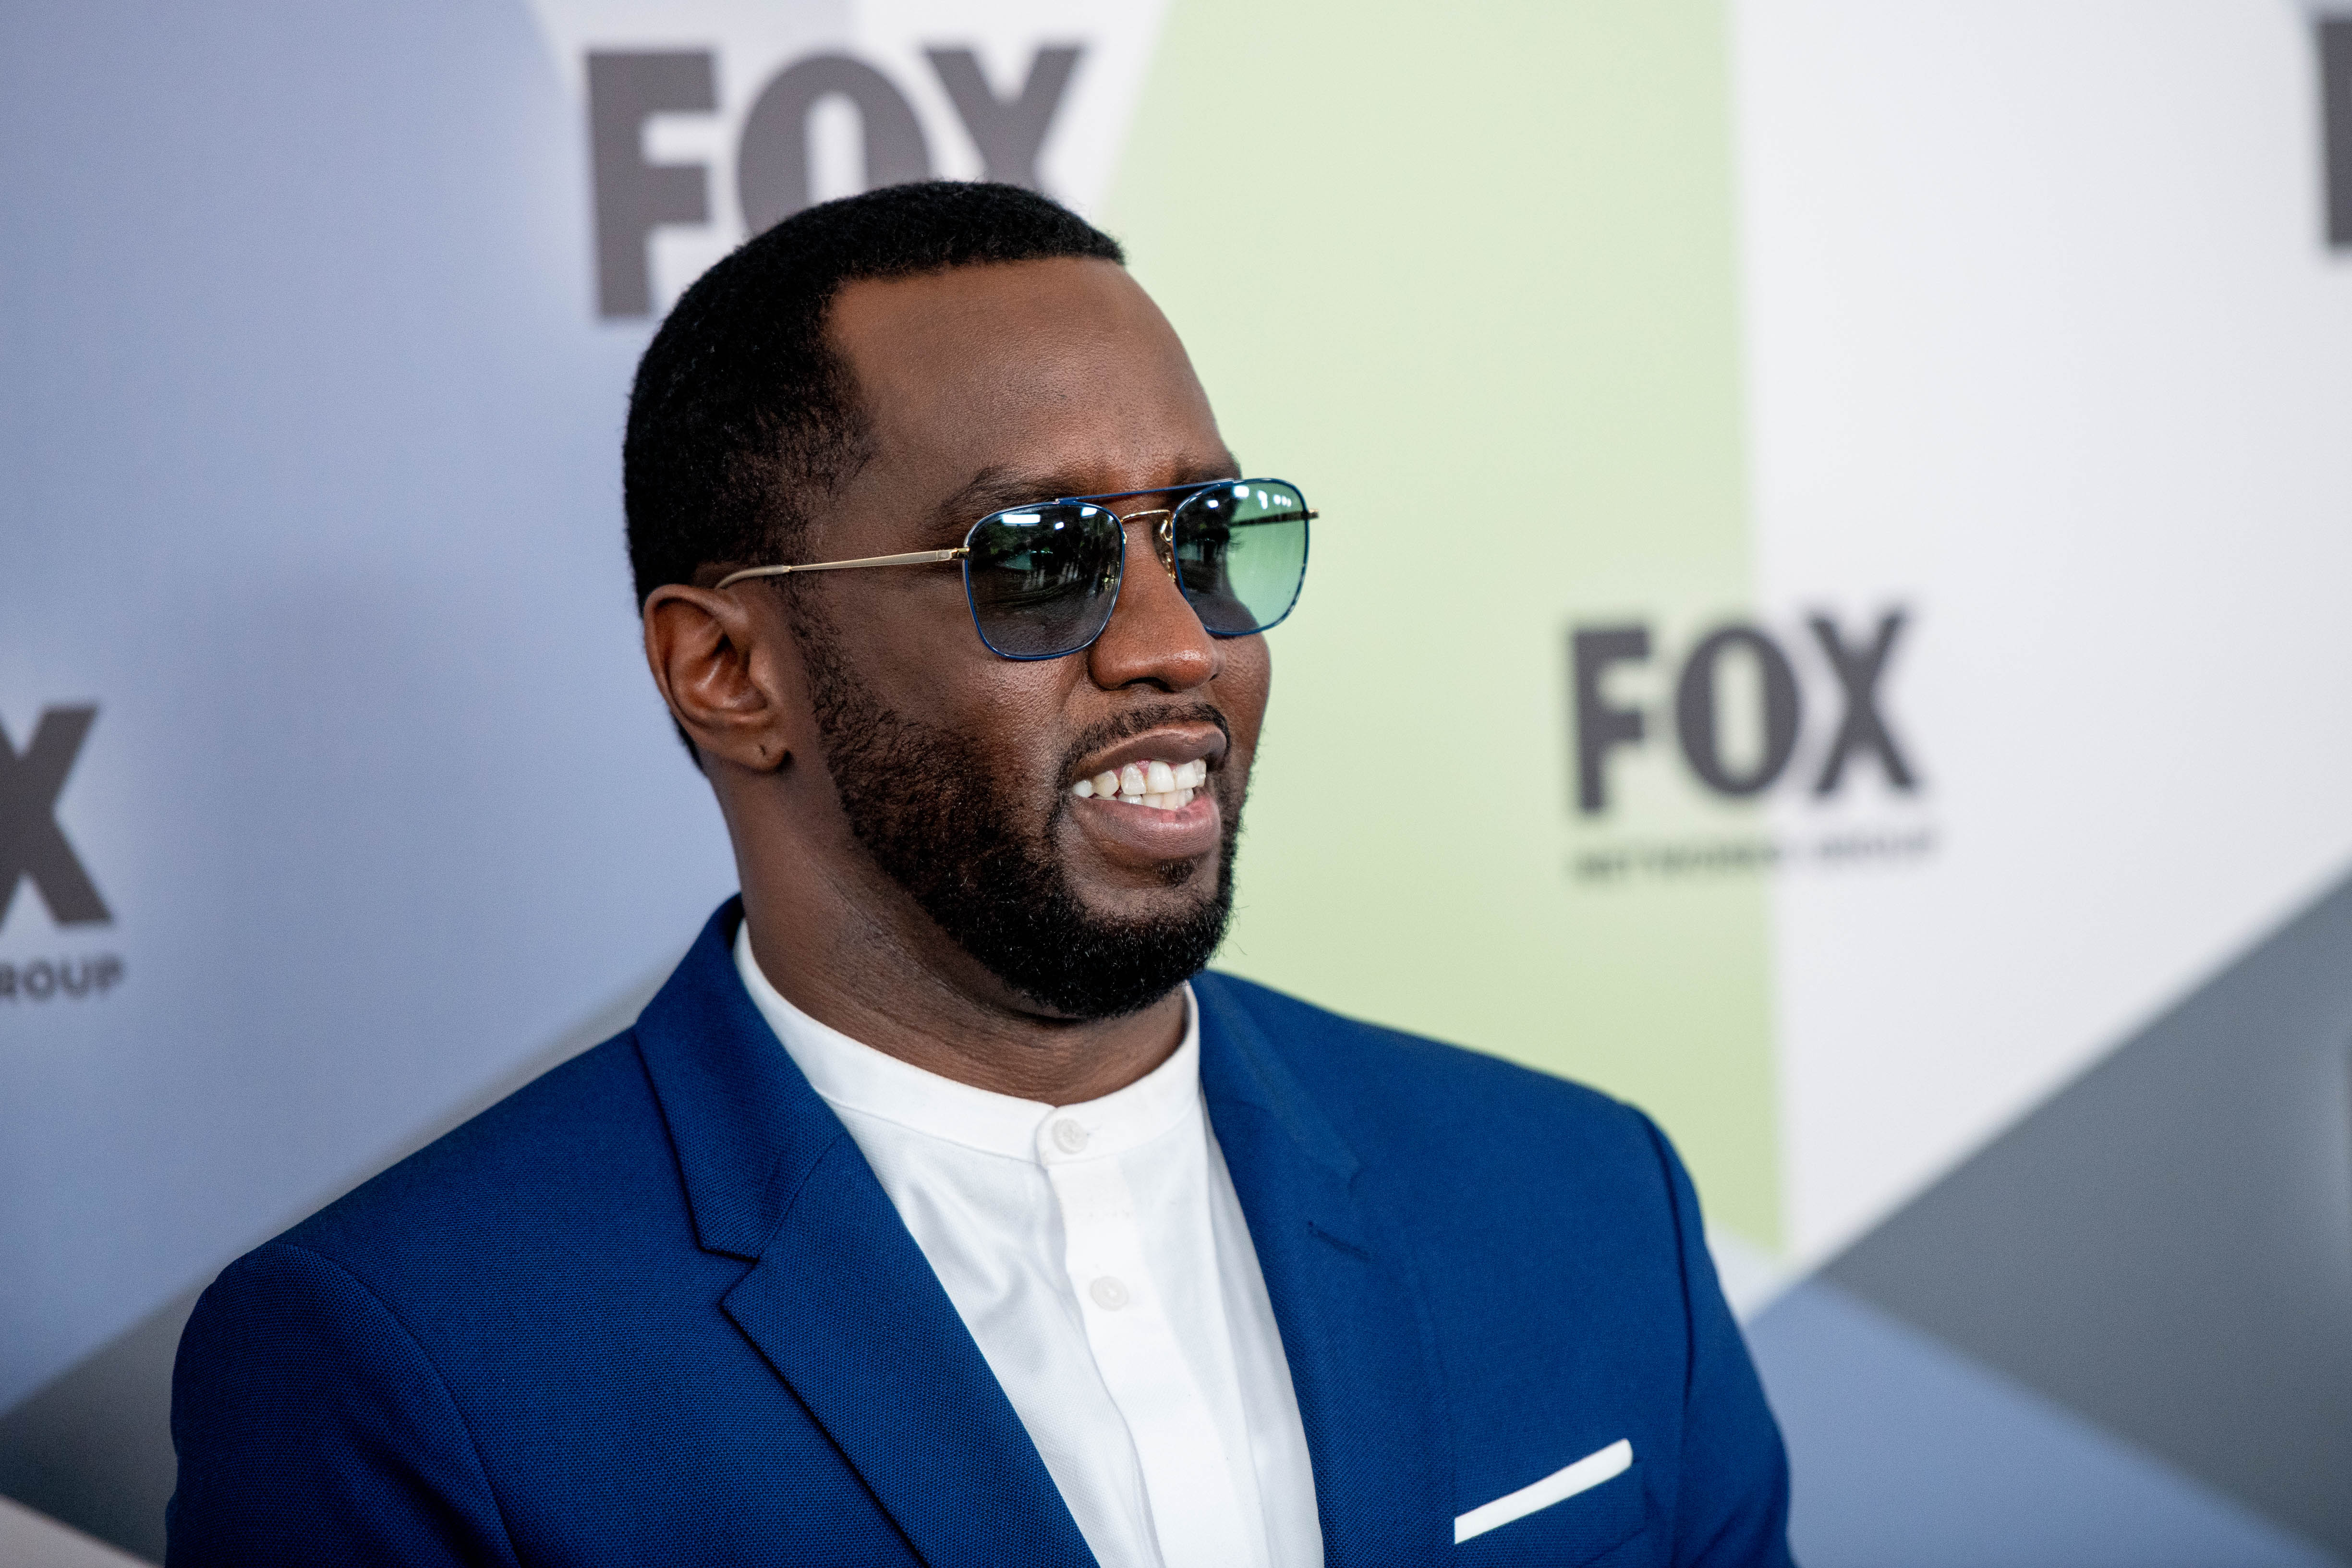 Sean "Diddy" Combs at the 2018 Fox Network Upfront at Wollman Rink, Central Park on May 14, 2018 in New York City. | Source: Getty Images